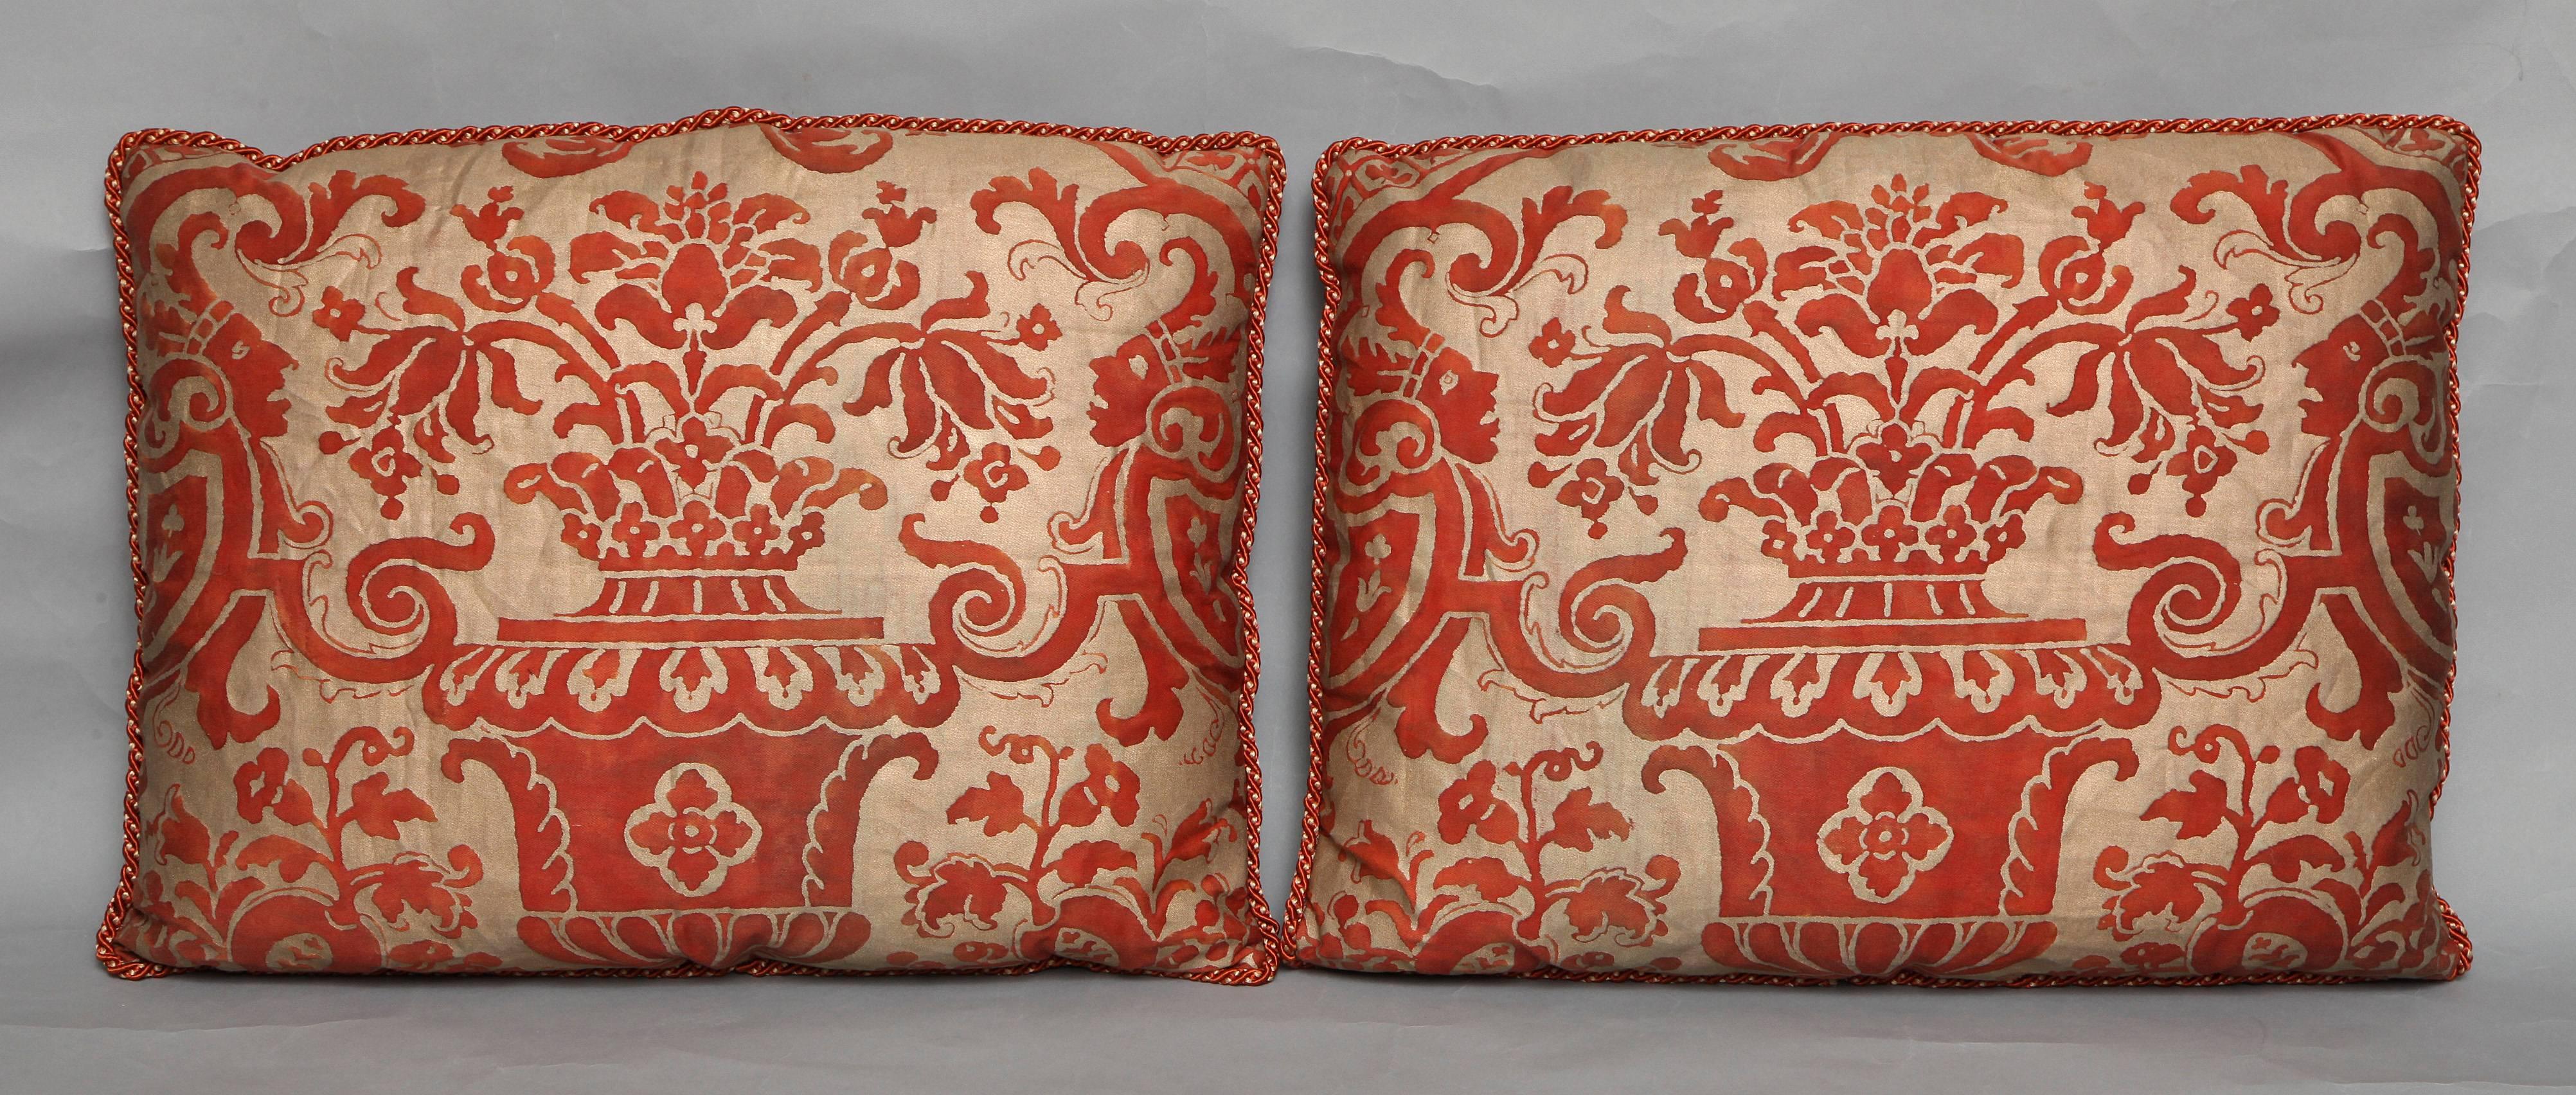 A pair of Fortuny fabric cushions in the Carnavalet pattern, rectangular shade in a silvery gold ground and red damask with linen backs and braided edging, the pattern, a 17th century French design named for the Carnavalet museum in Paris where